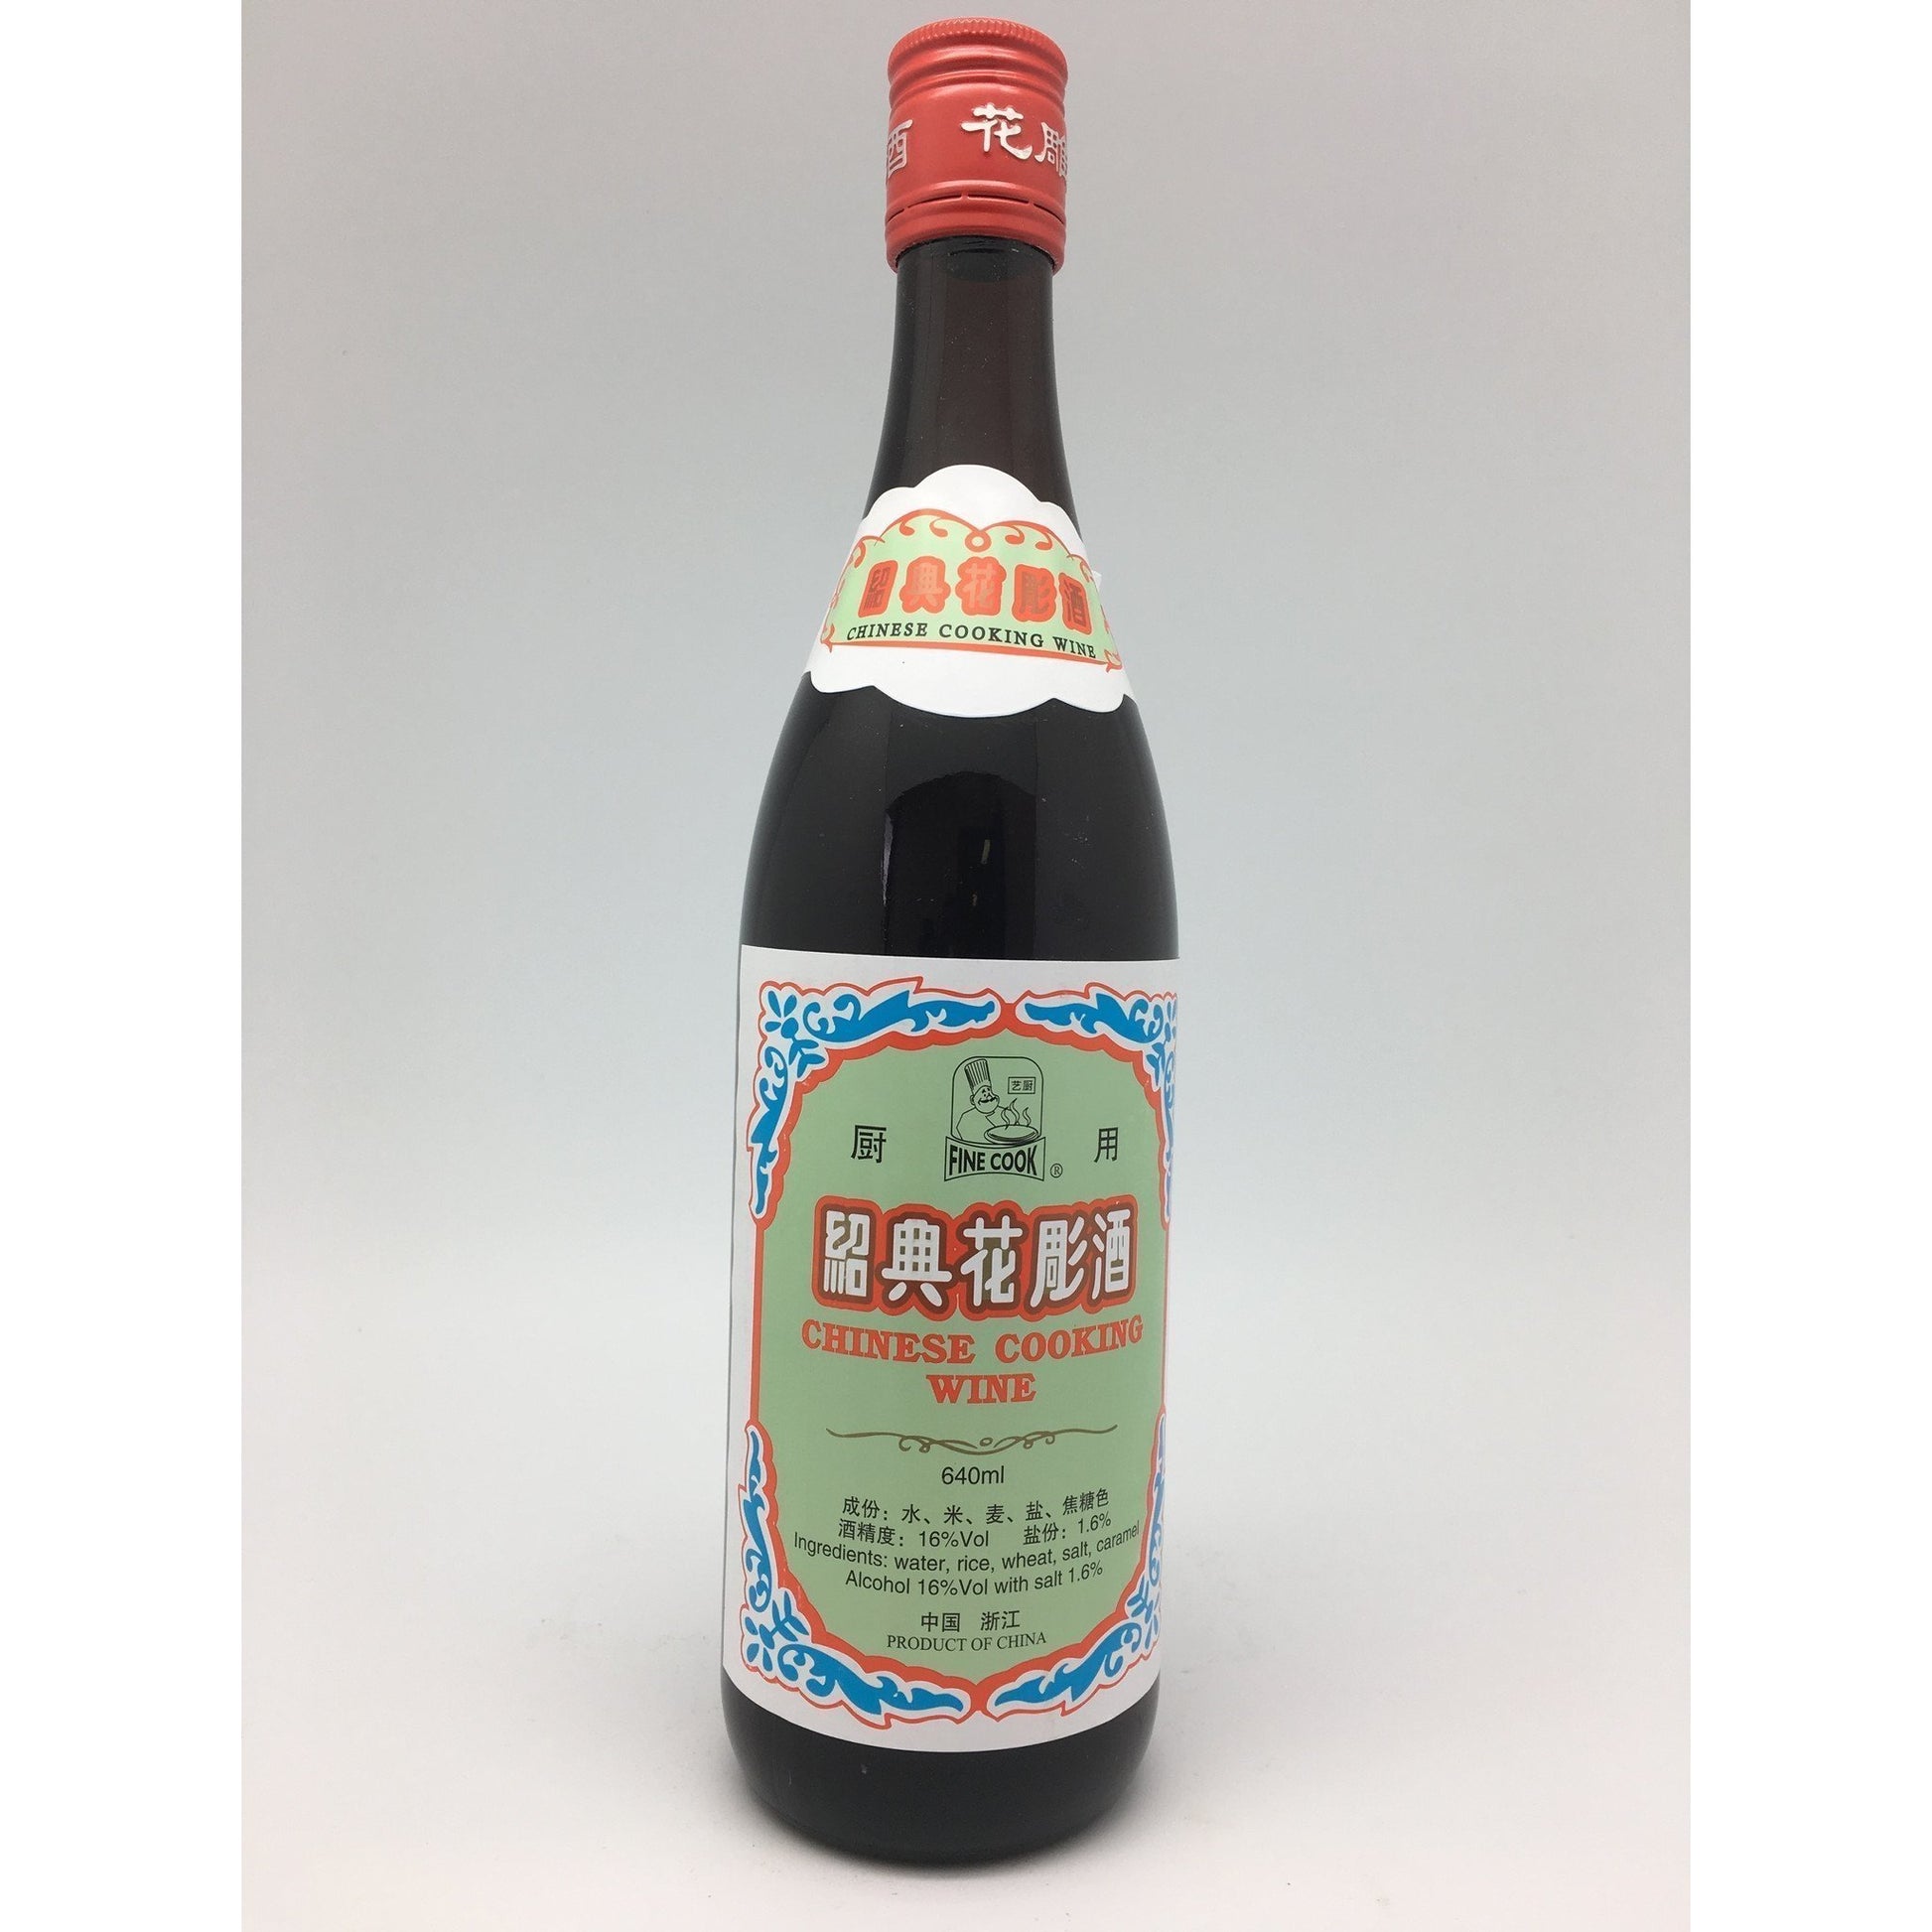 S095 - Chinese Cooking Wine 640ml - 12 bot / 1CTN - New Eastland Pty Ltd - Asian food wholesalers